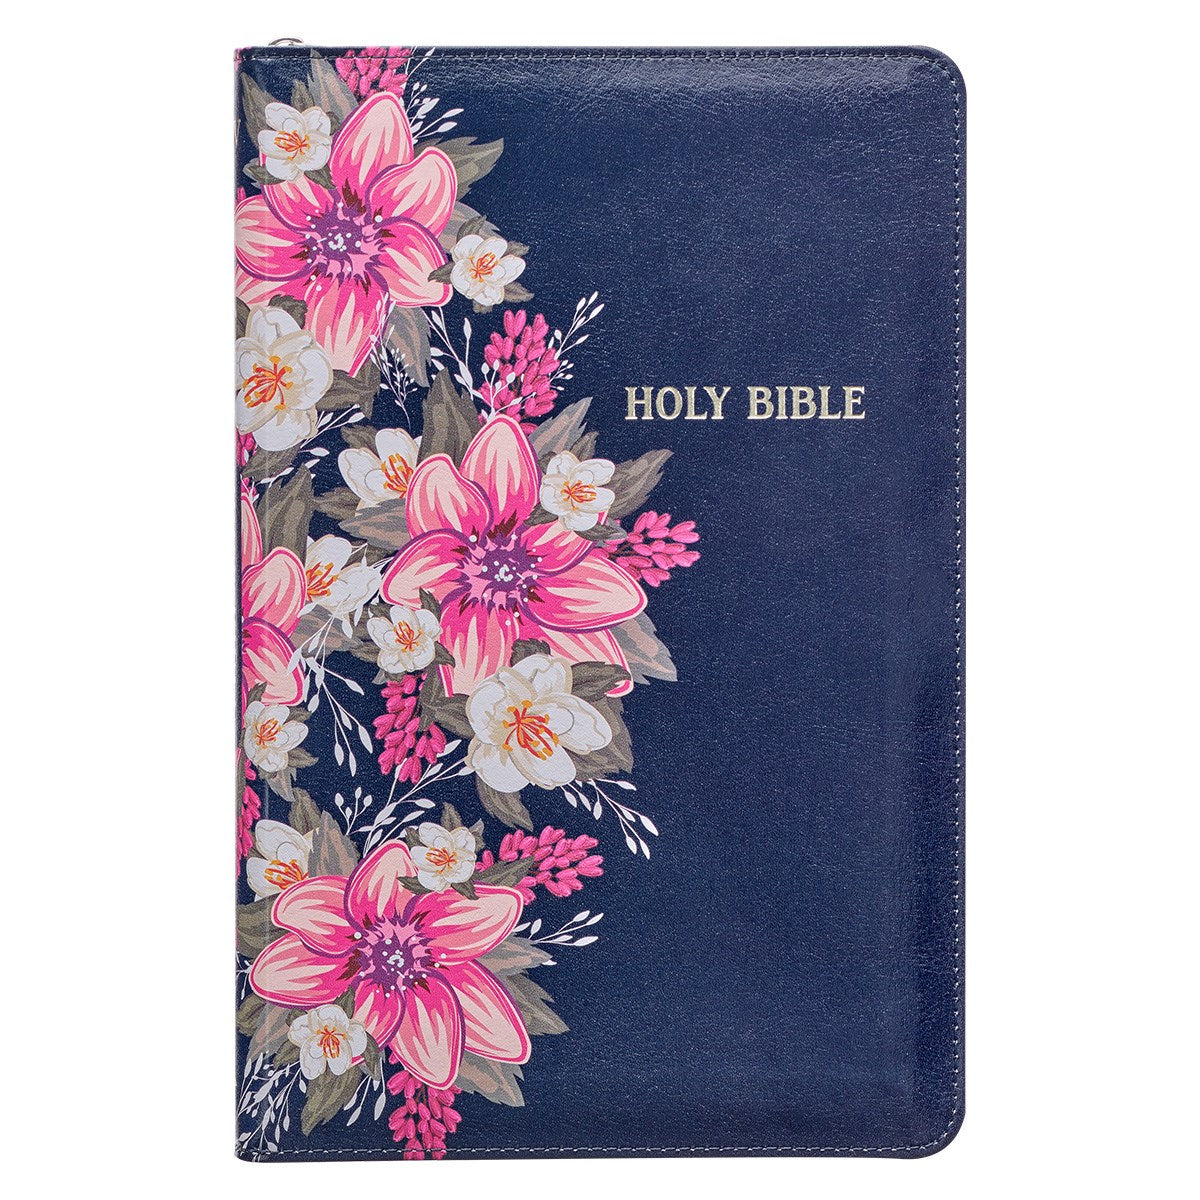 Seed of Abraham Christian Bookstore - (In)Courage - KJV Deluxe Gift Bible-Printed Floral Blue LuxLeather with Zipper